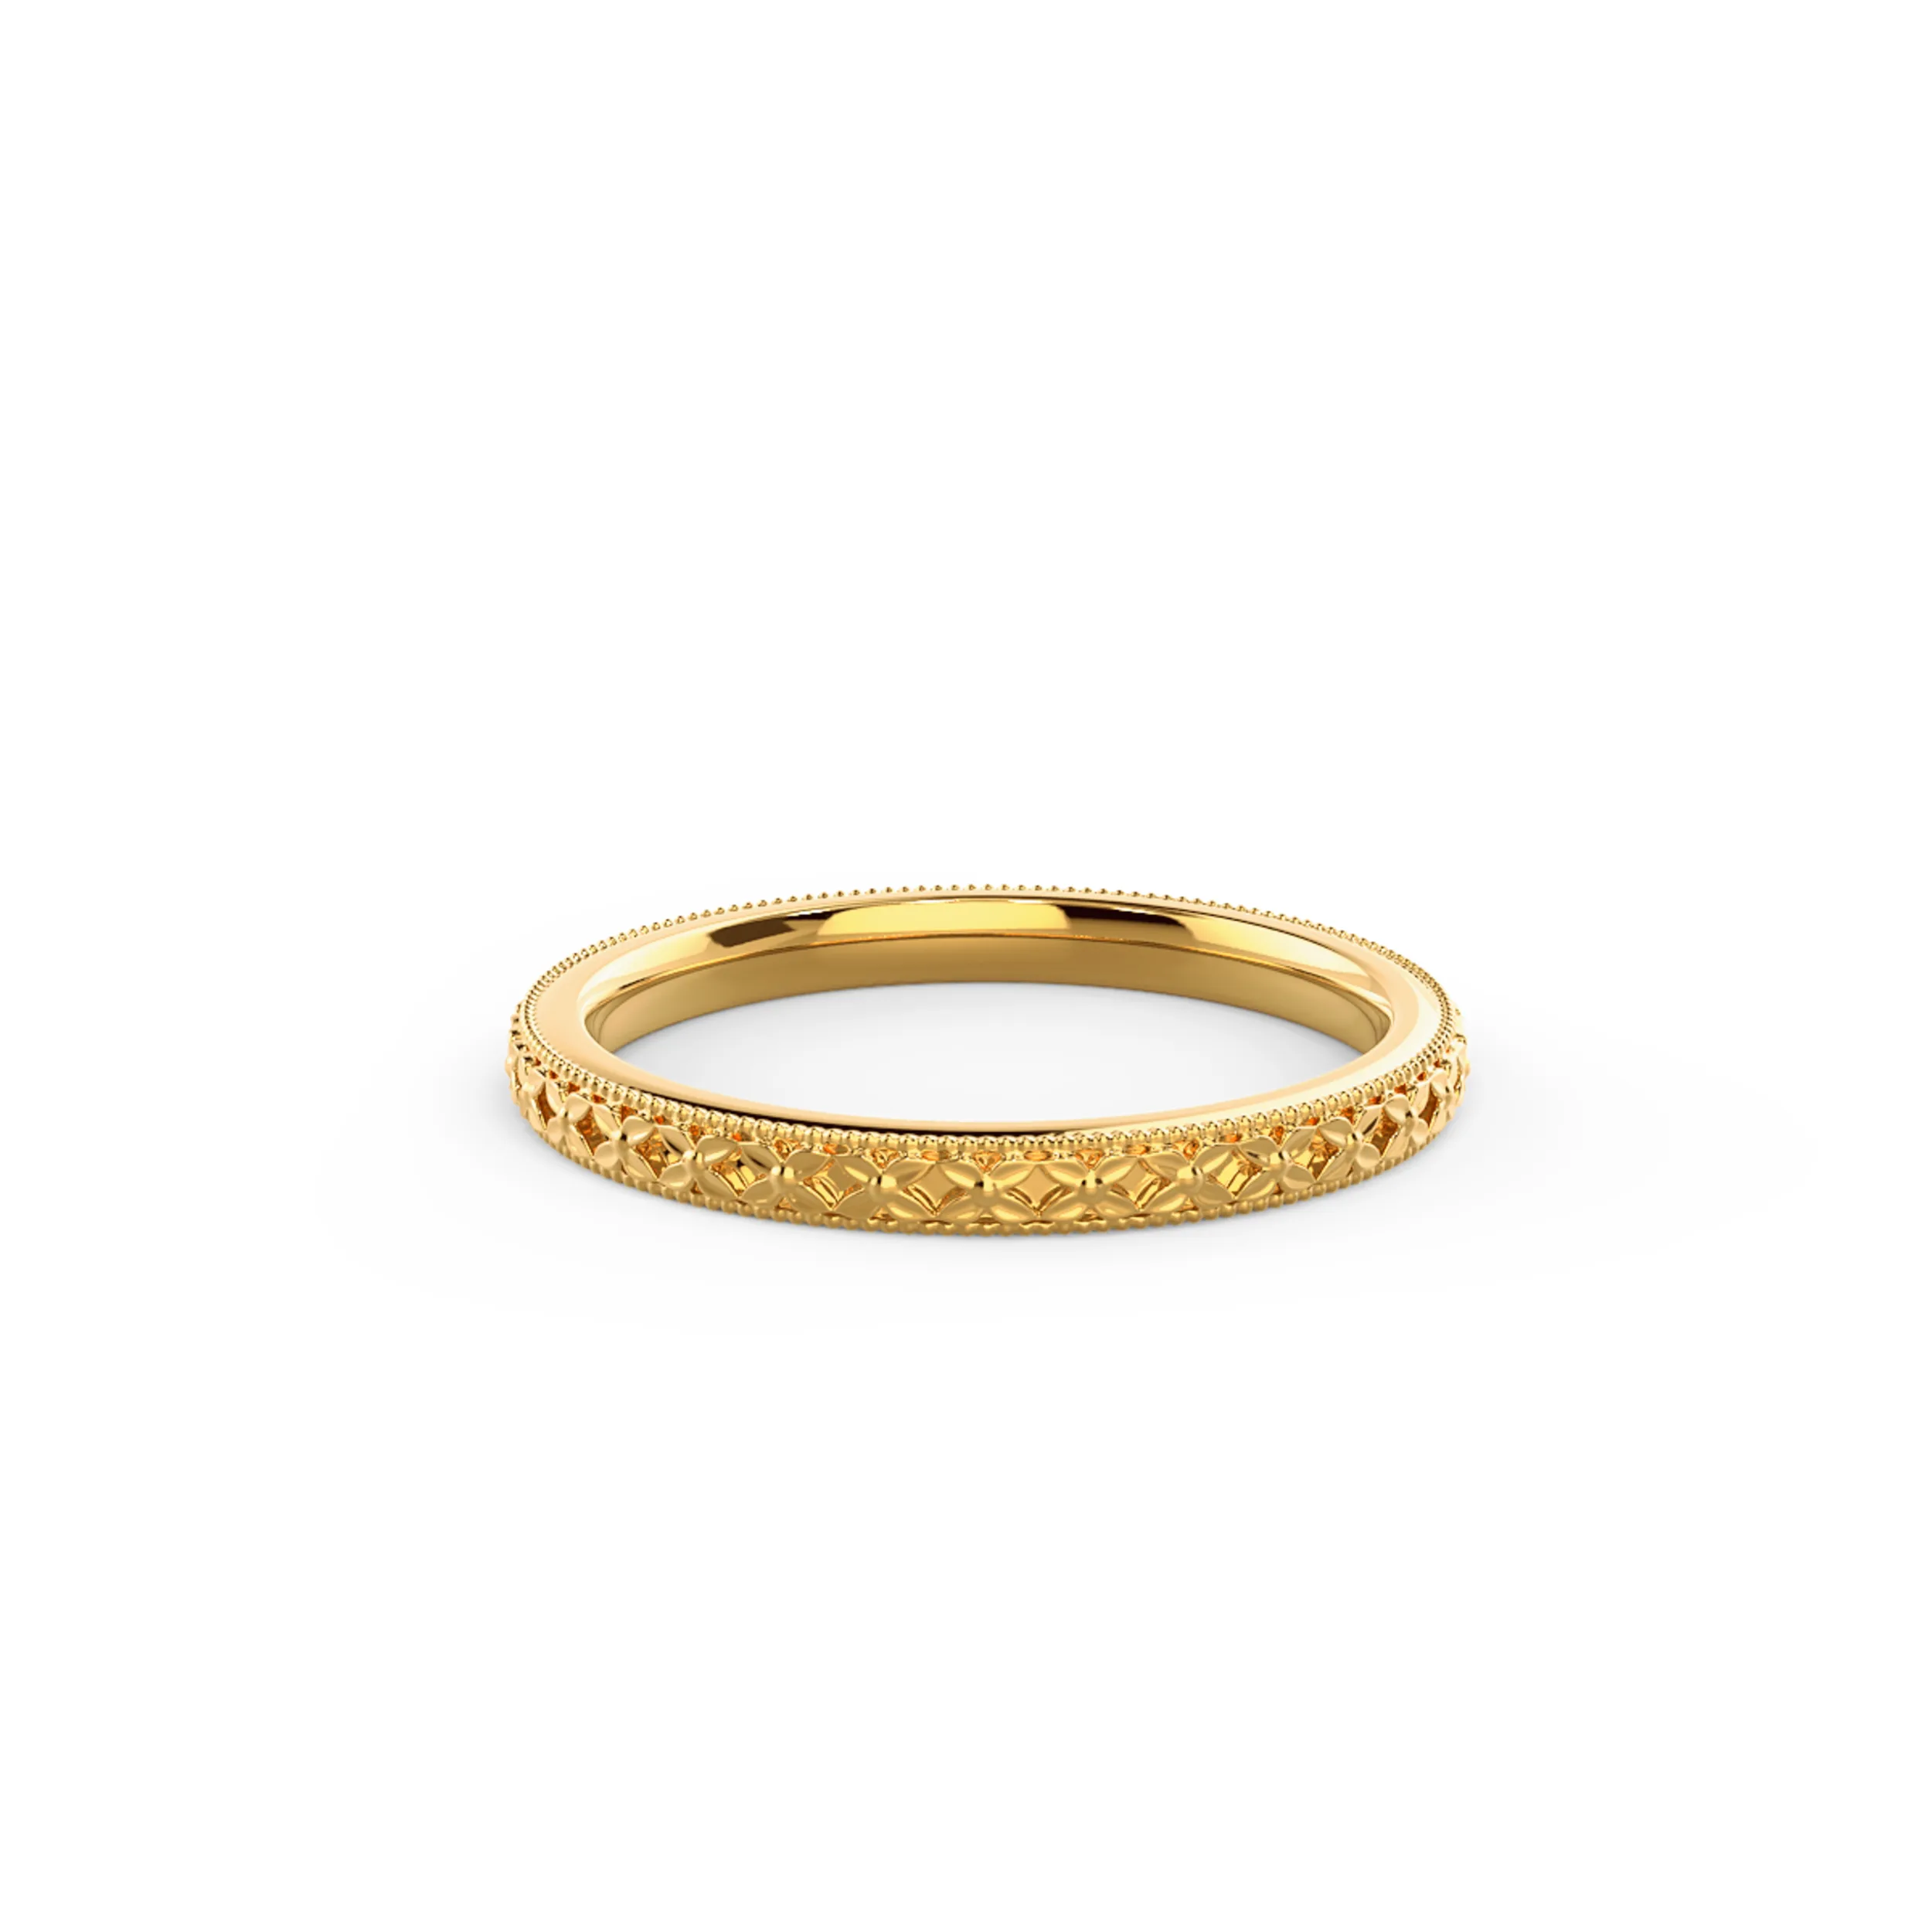 High Quality Plain Metal Lab Diamonds set in 18k Yellow Gold Engraved Eternity Band (Main View)